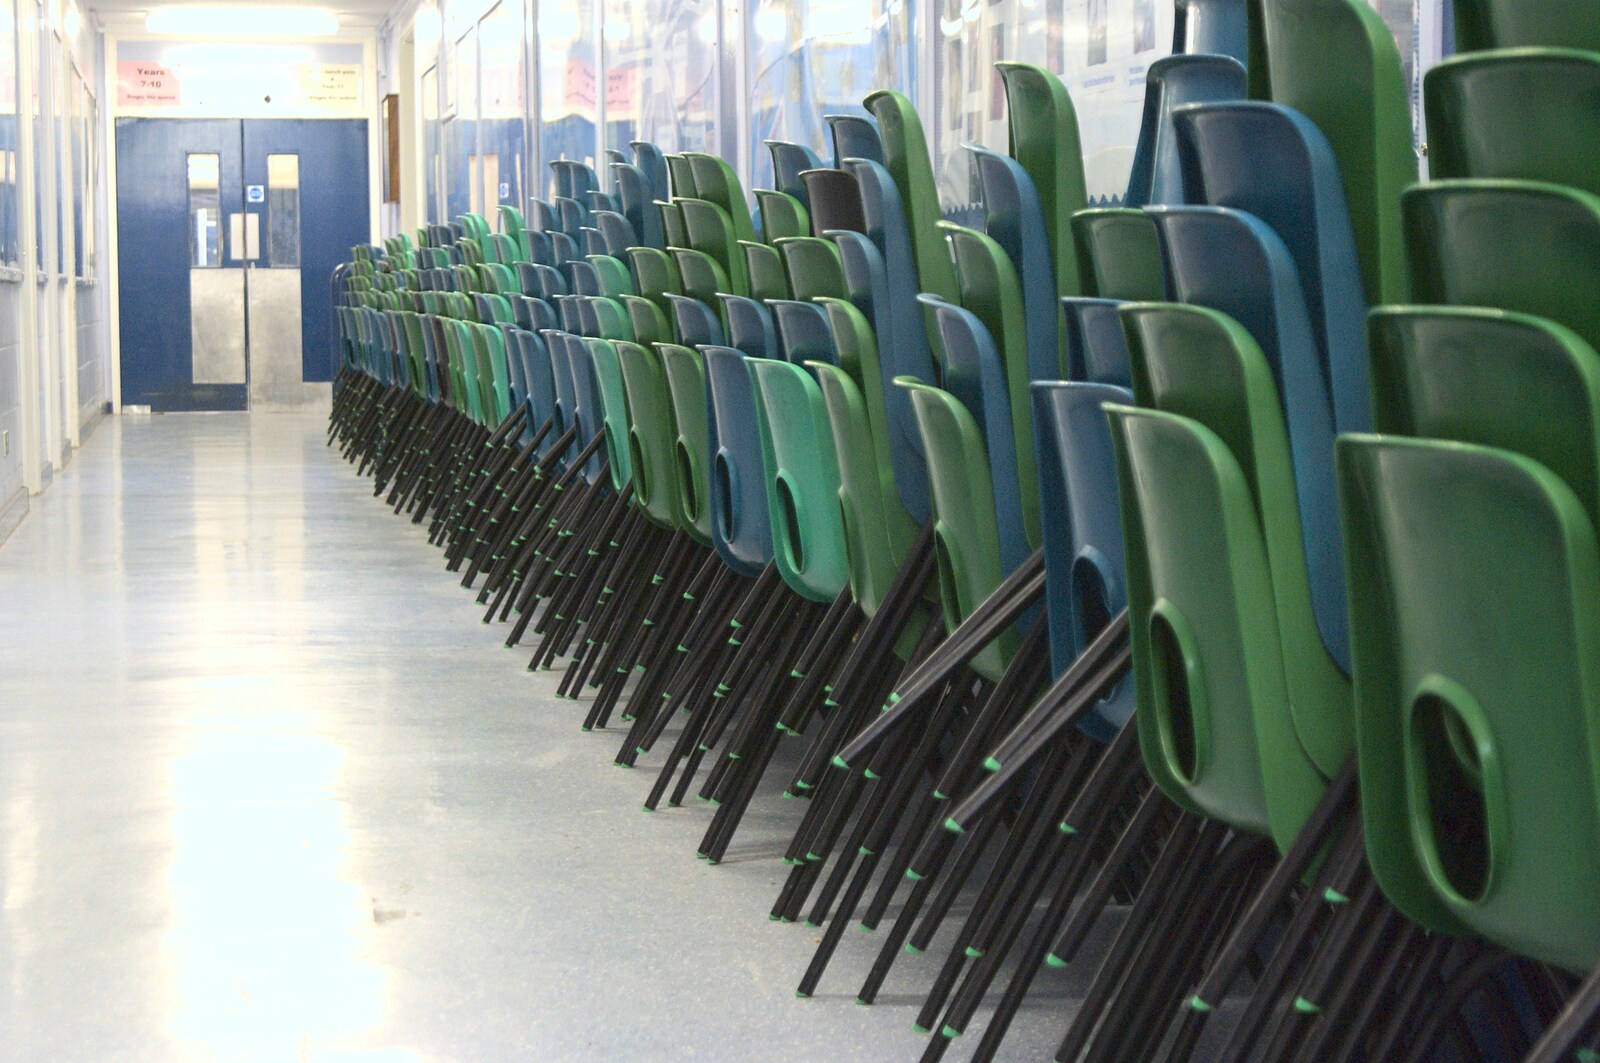 Exam chairs in the corridor at Hartismere School from A Trip to Norwich, and Ipswich Dereliction, Norfolk and Suffolk - 24th April 2010